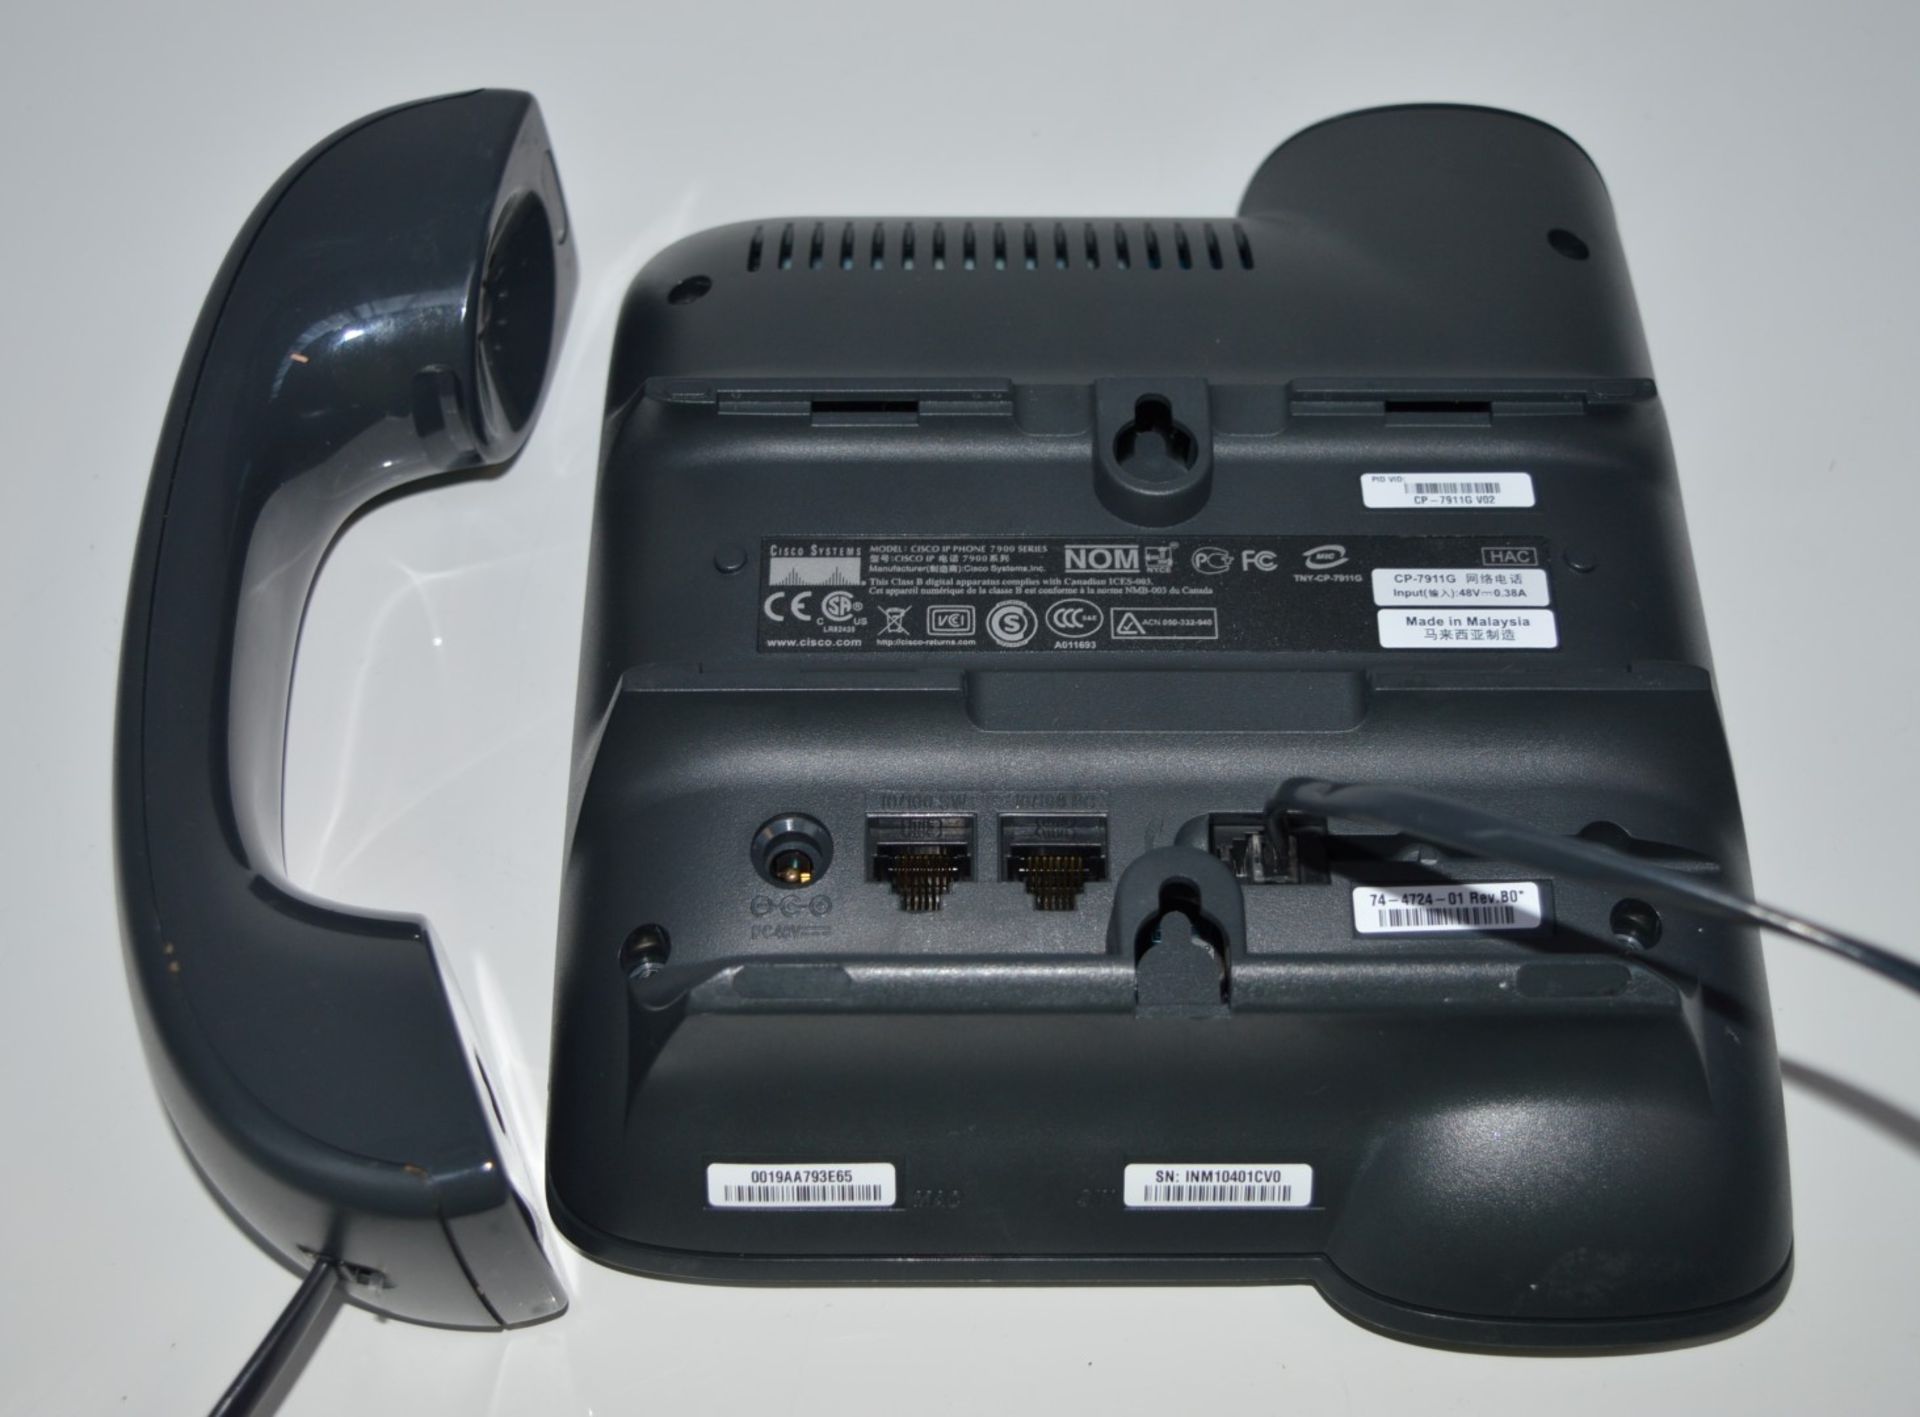 4 x Cisco CP-7911G Unified IP SIP Phones - Removed From a Working Office Environment in Good - Image 6 of 8